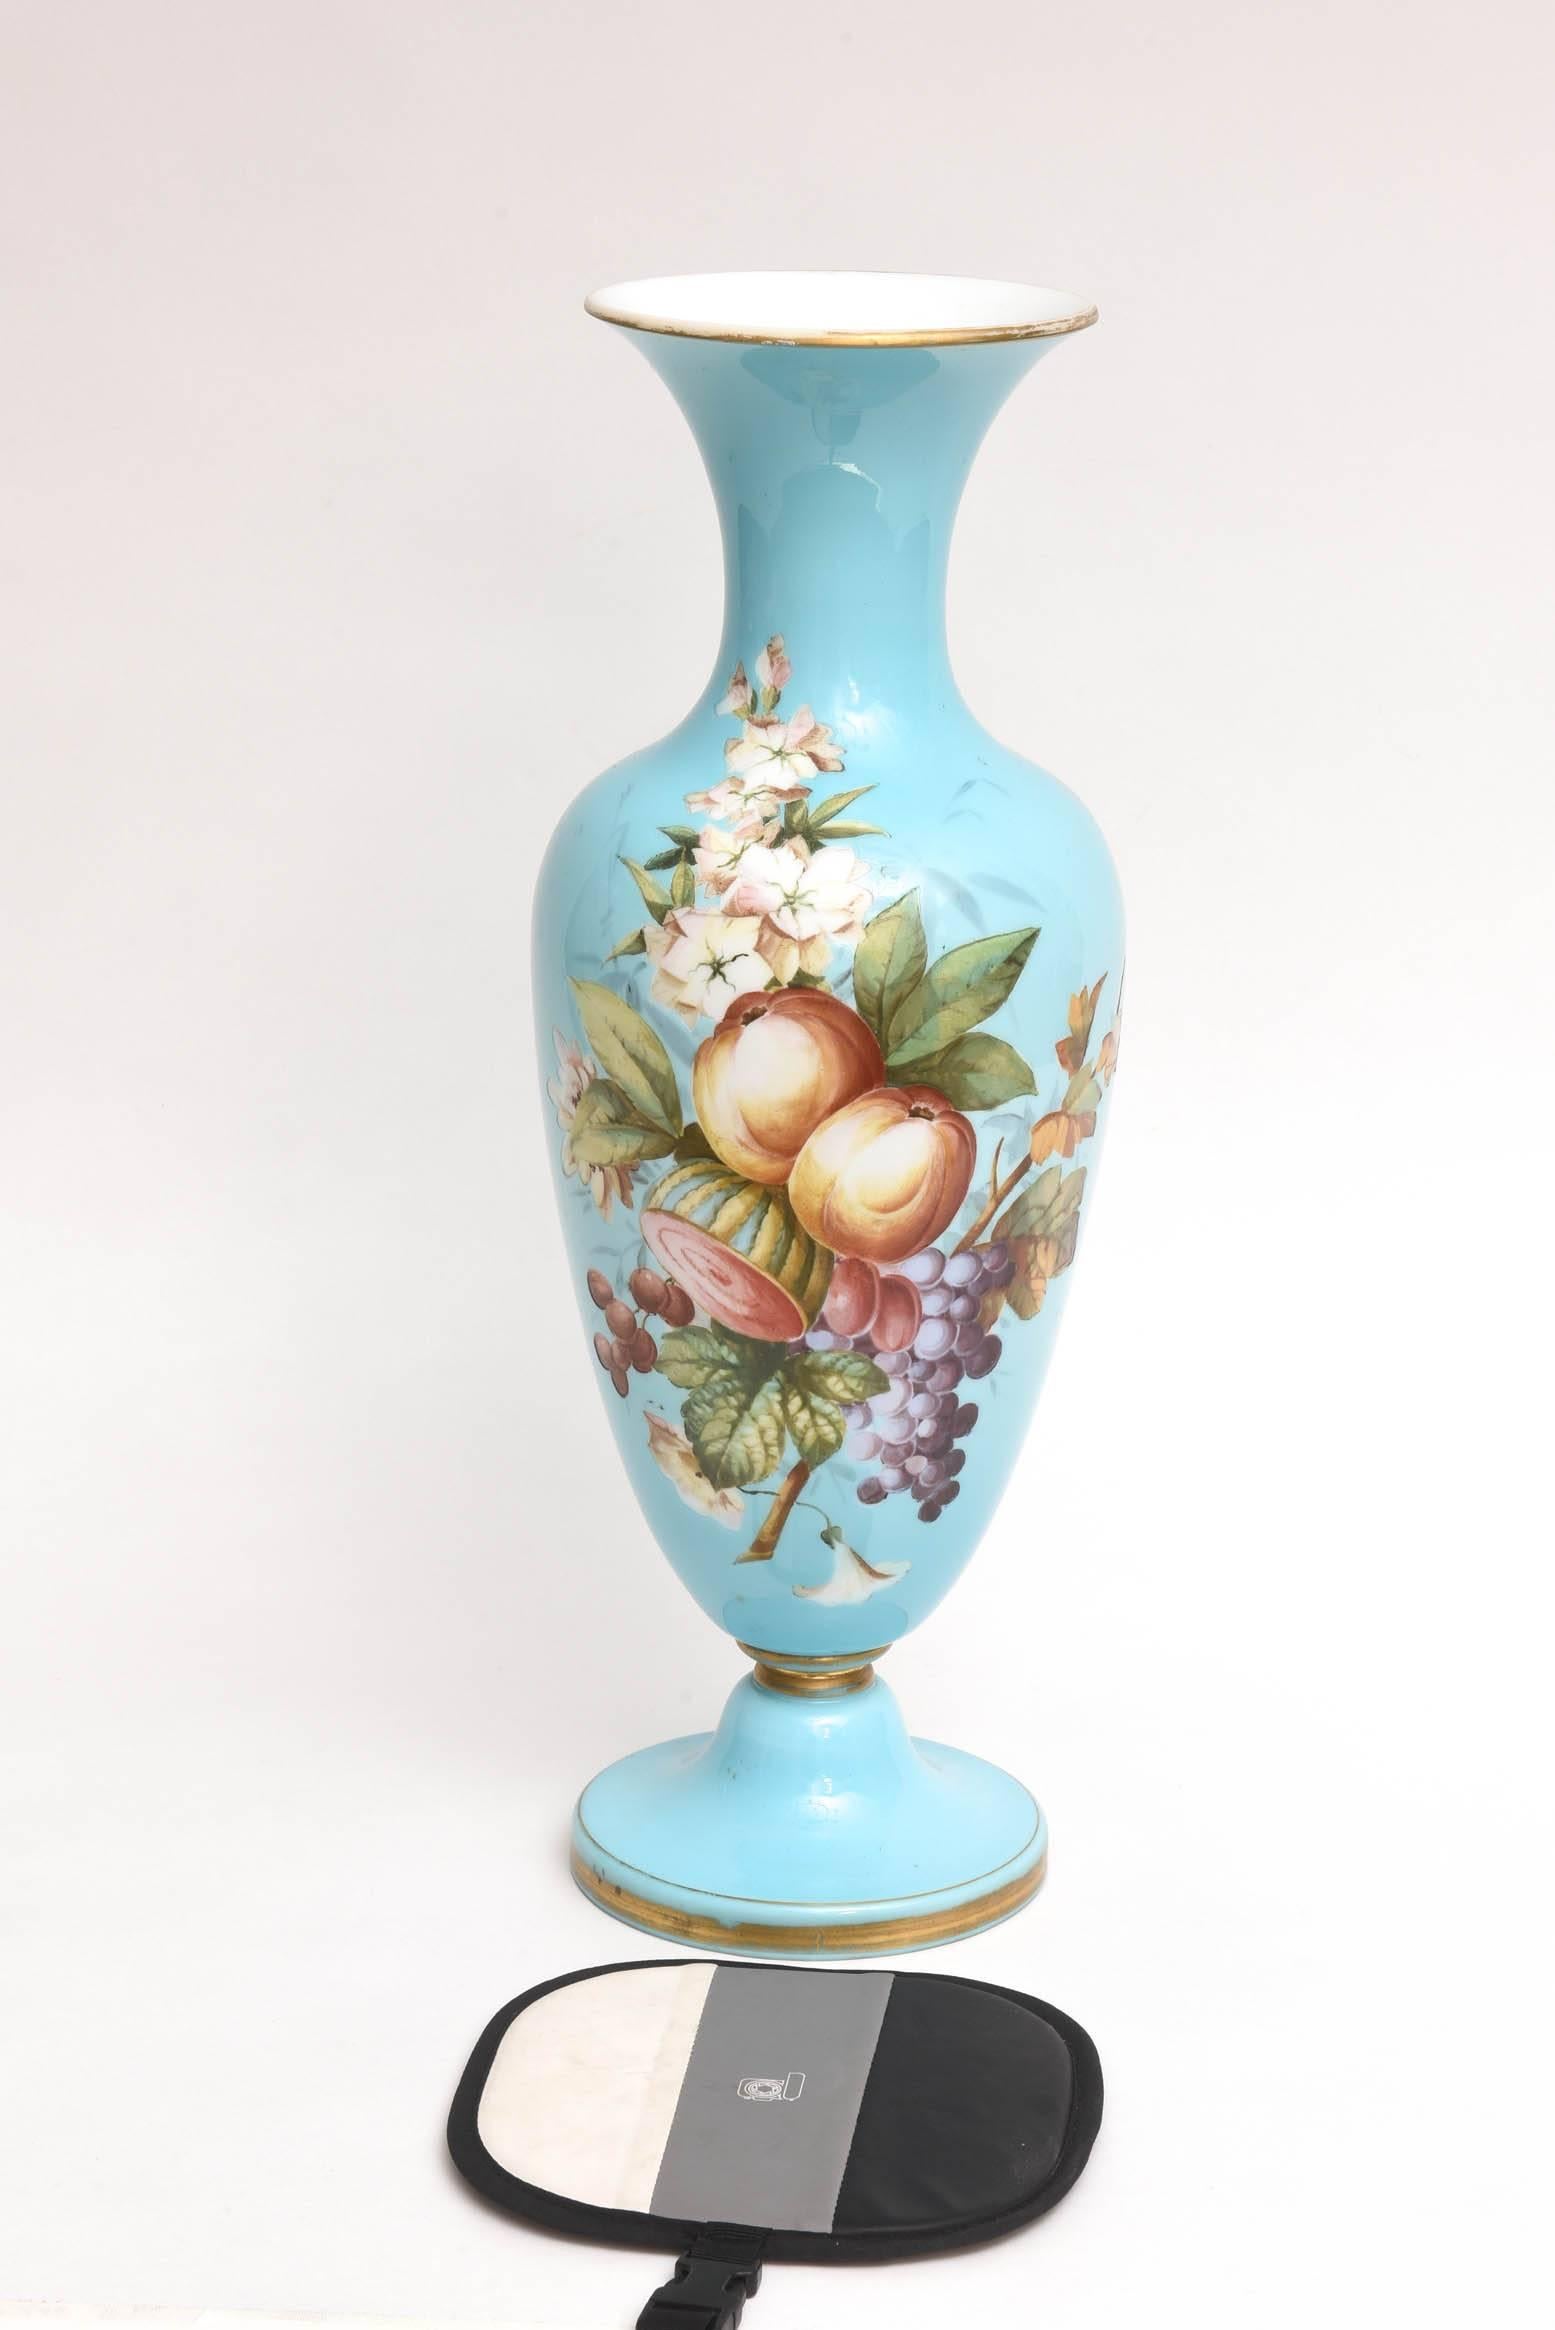 An elegant and tall vase with a pedestal base highlighted with crisp and beautiful florals on its vibrant turquoise ground, 19th century and of the quality and style produced by Baccarat of that era. Lovely antique condition for being over 150 years